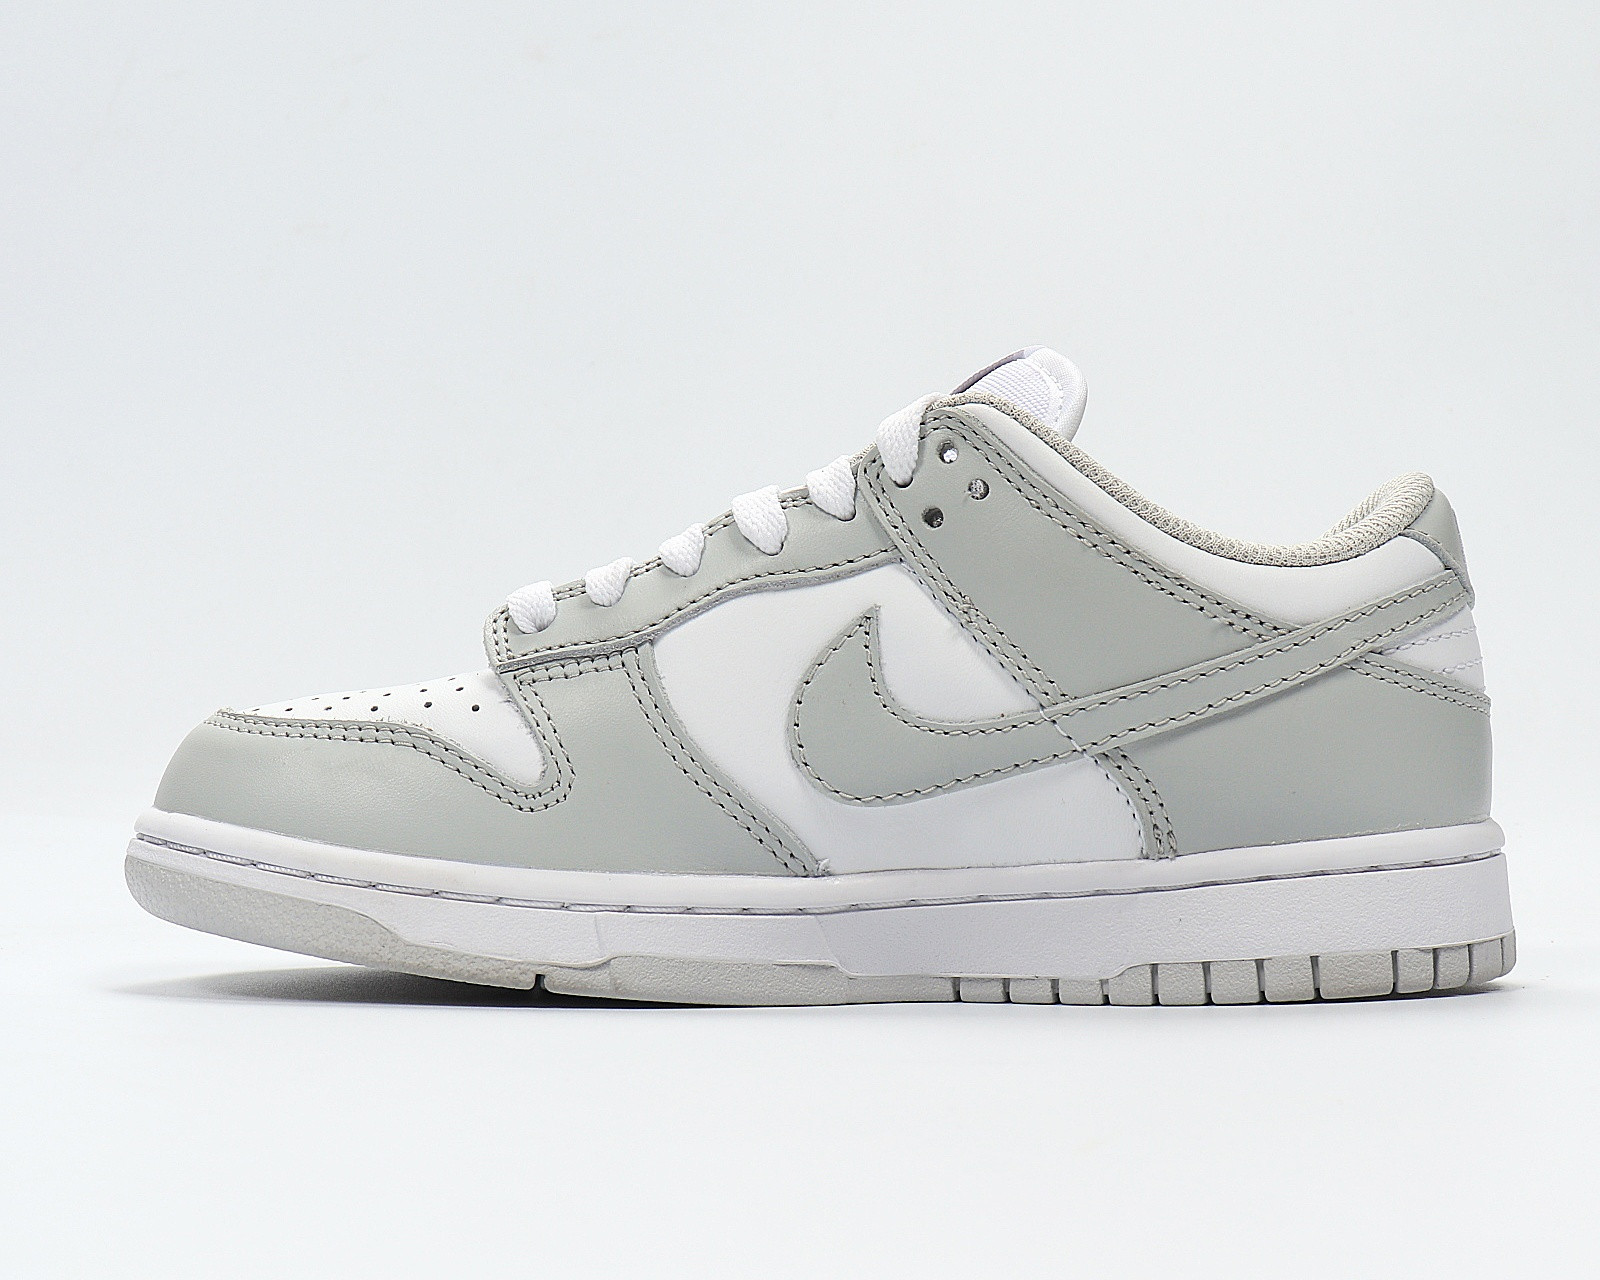 201 - MultiscaleconsultingShops - Nike SB Dunk Low SP White Grey